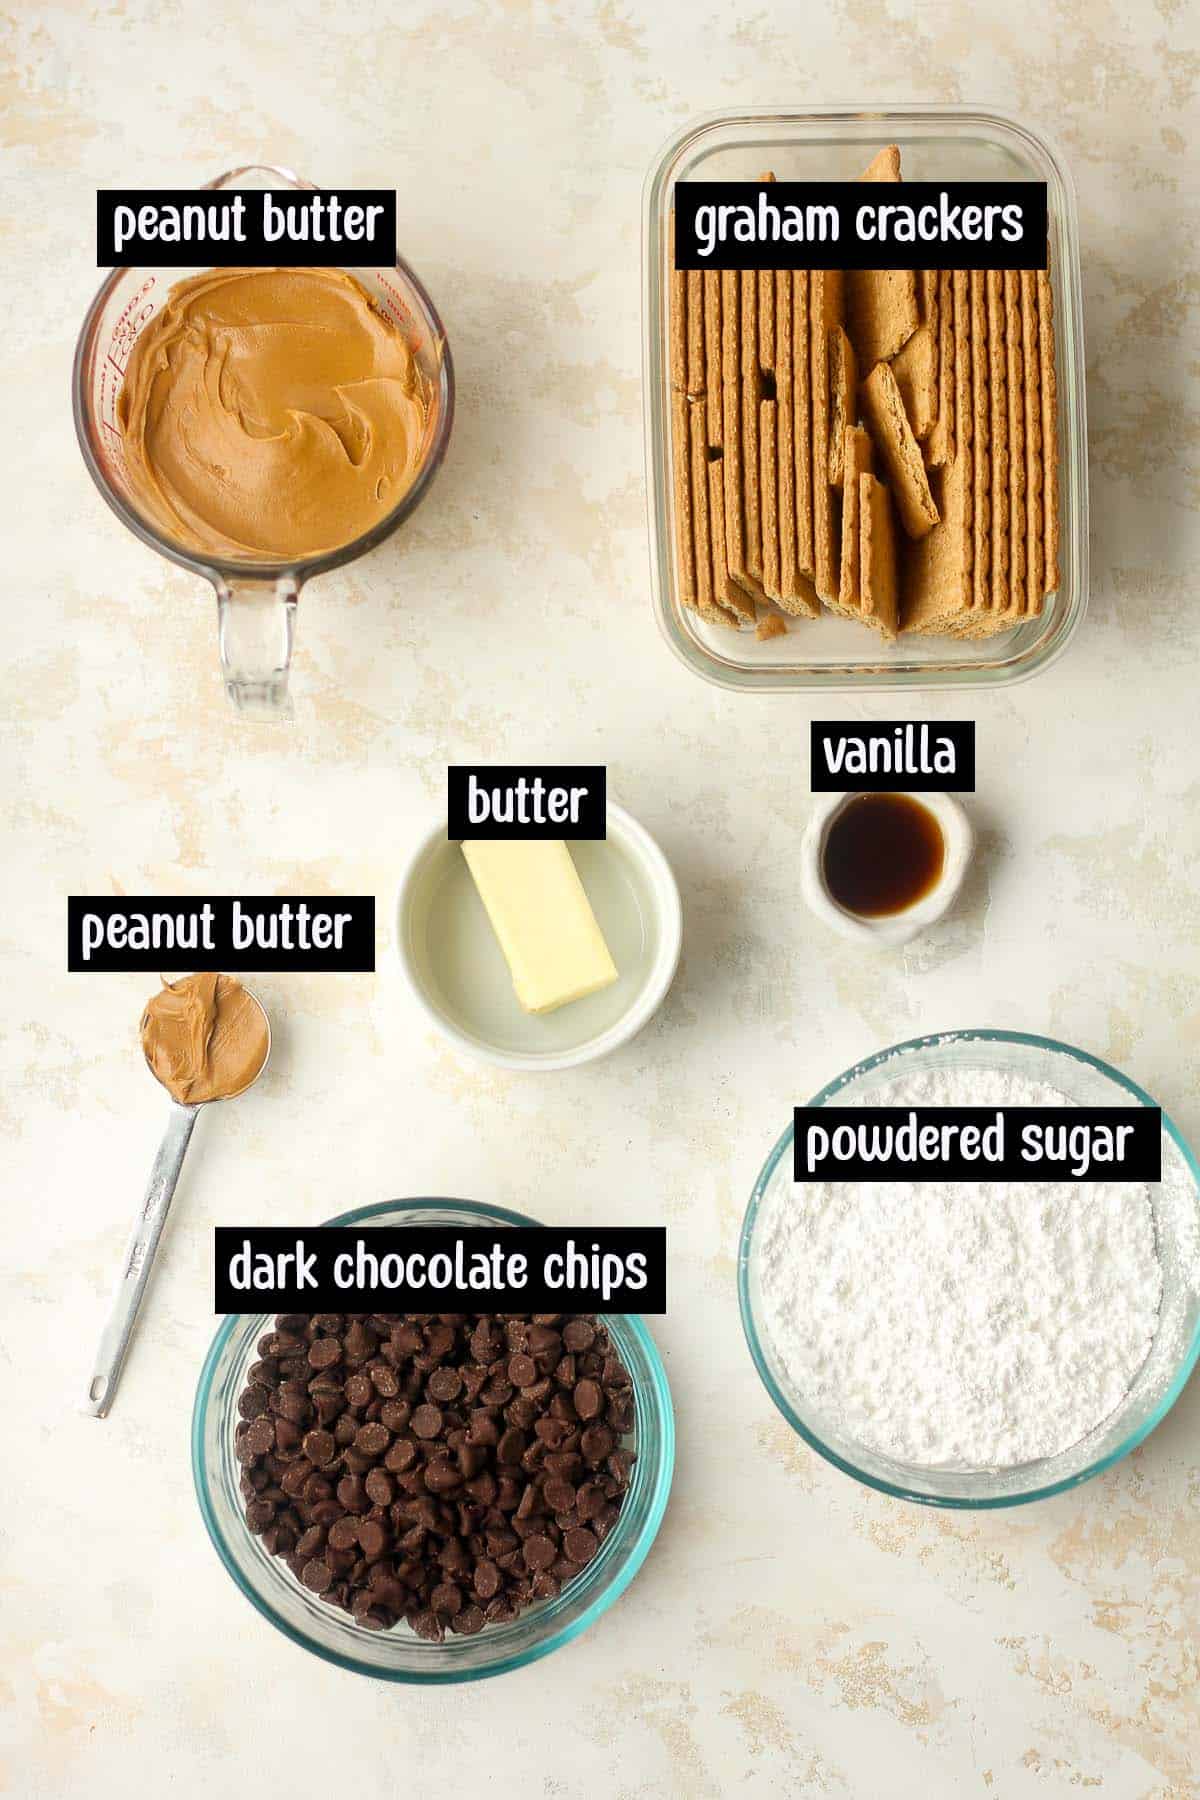 The ingredients for the chocolate peanut butter bars.